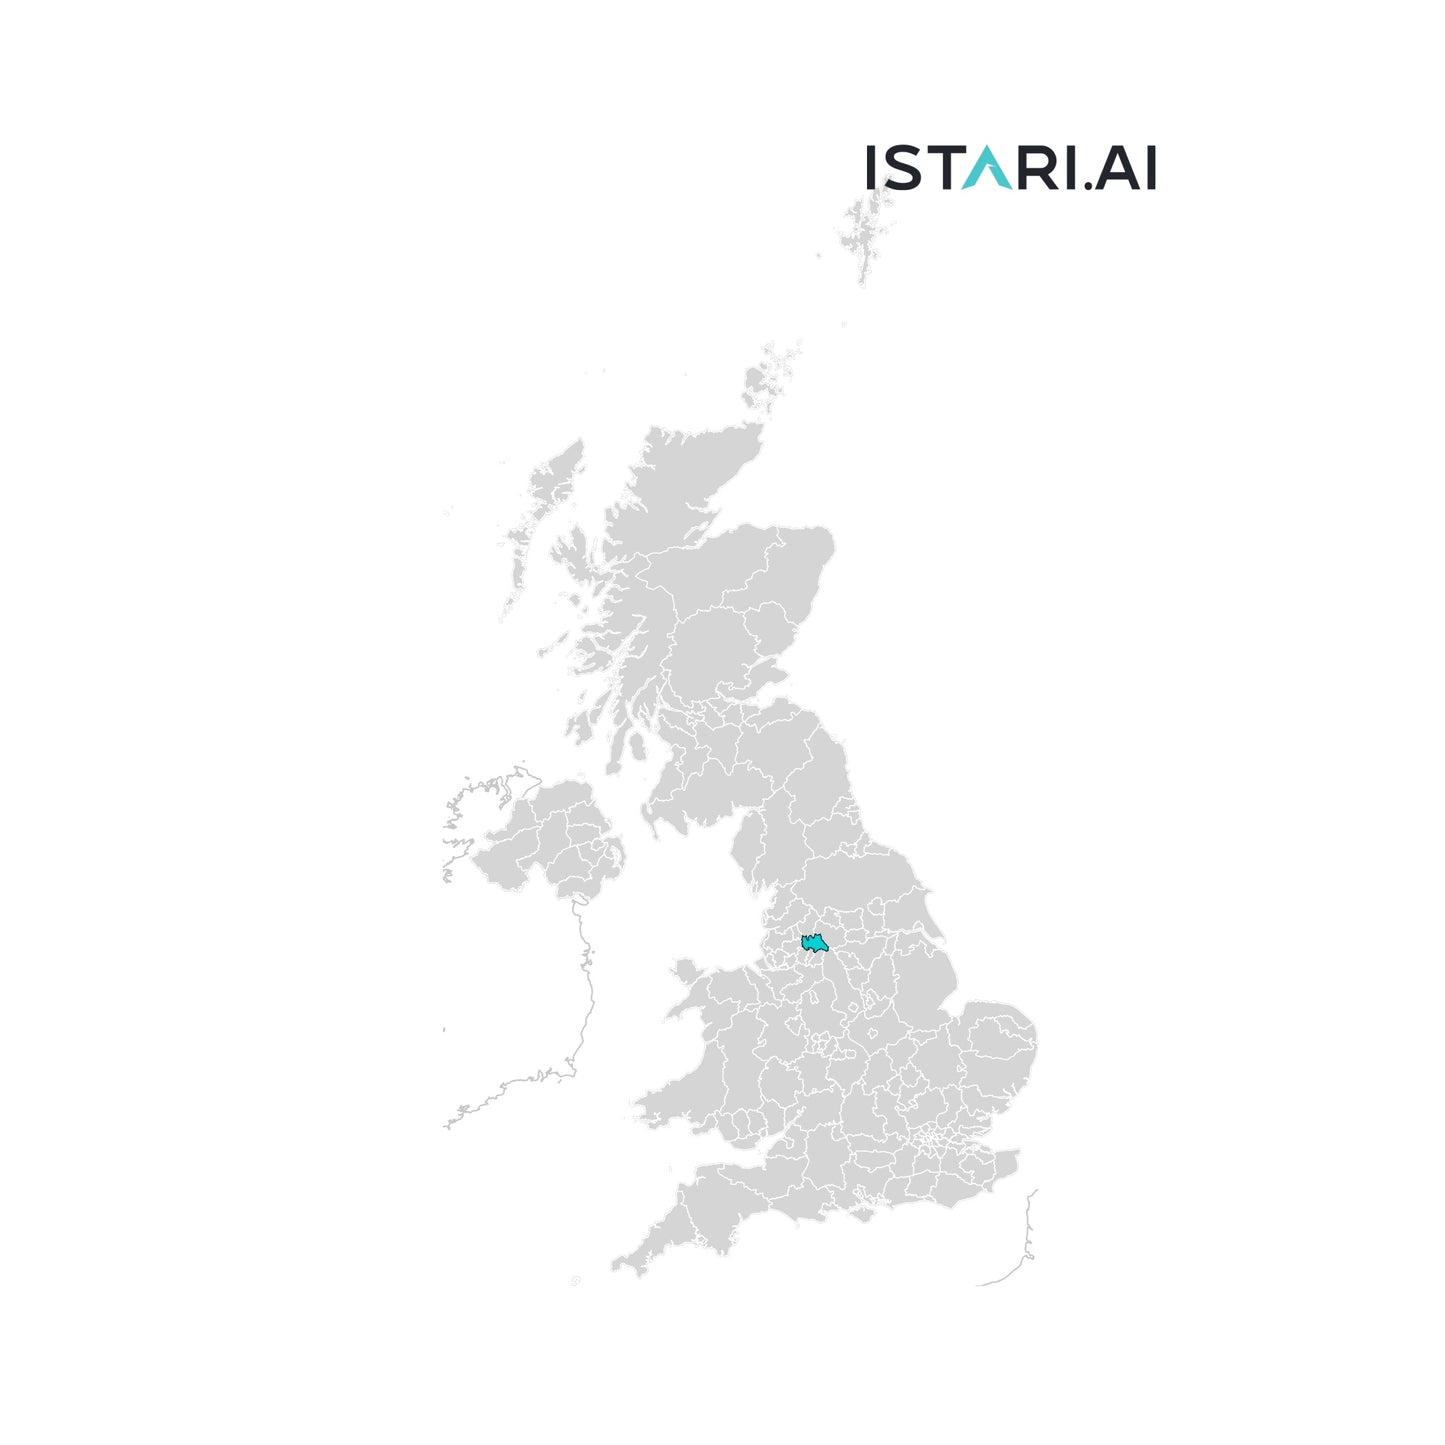 Artificial Intelligence AI Company List Greater Manchester North East United Kingdom